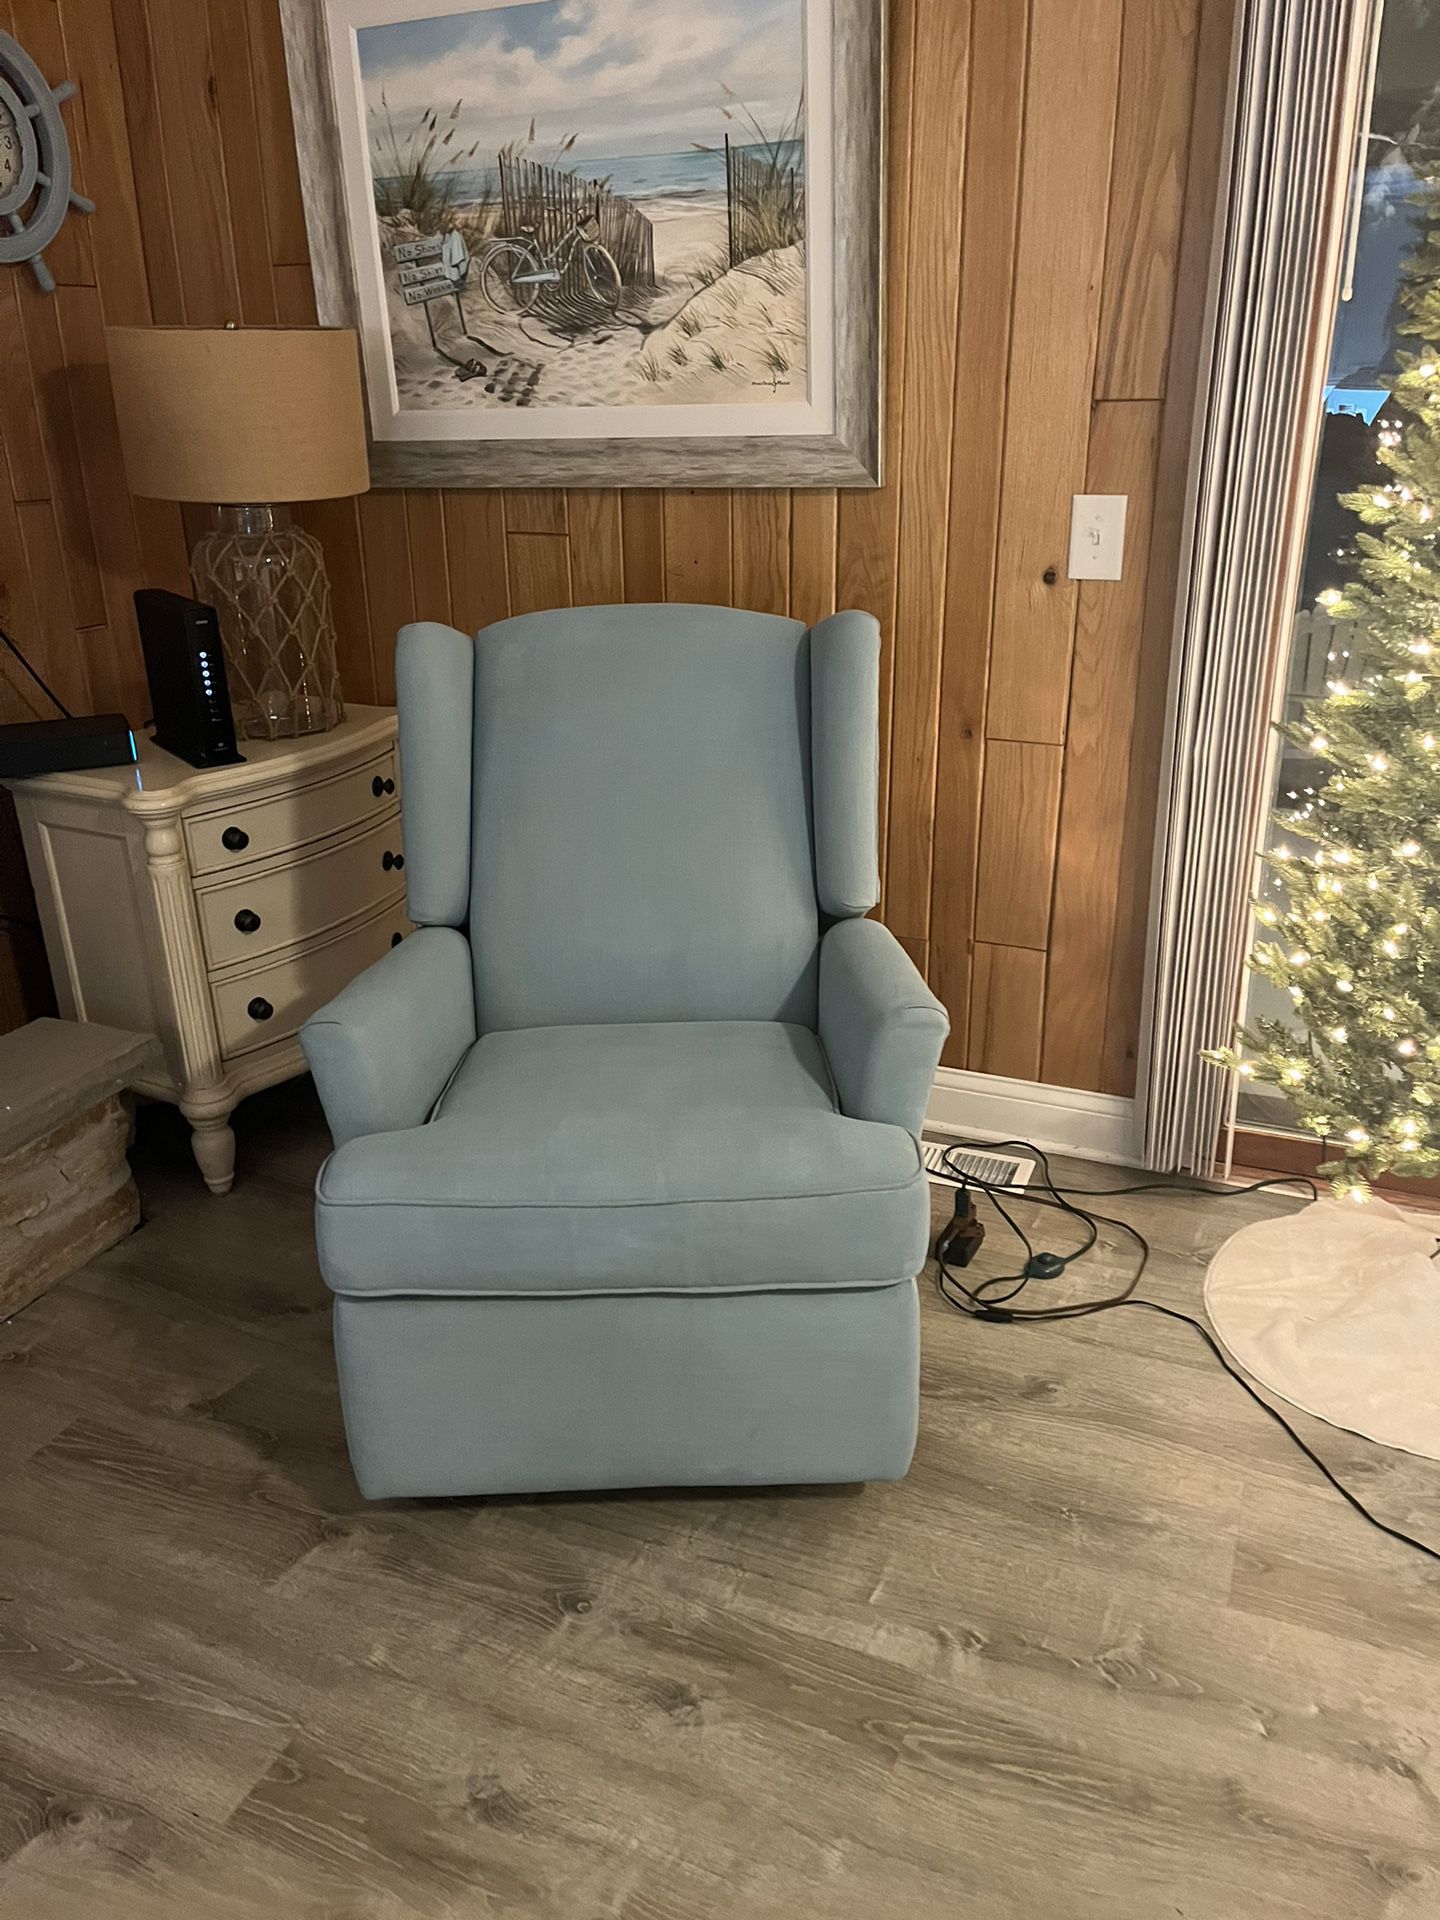 2 Recliner Swivel Chairs